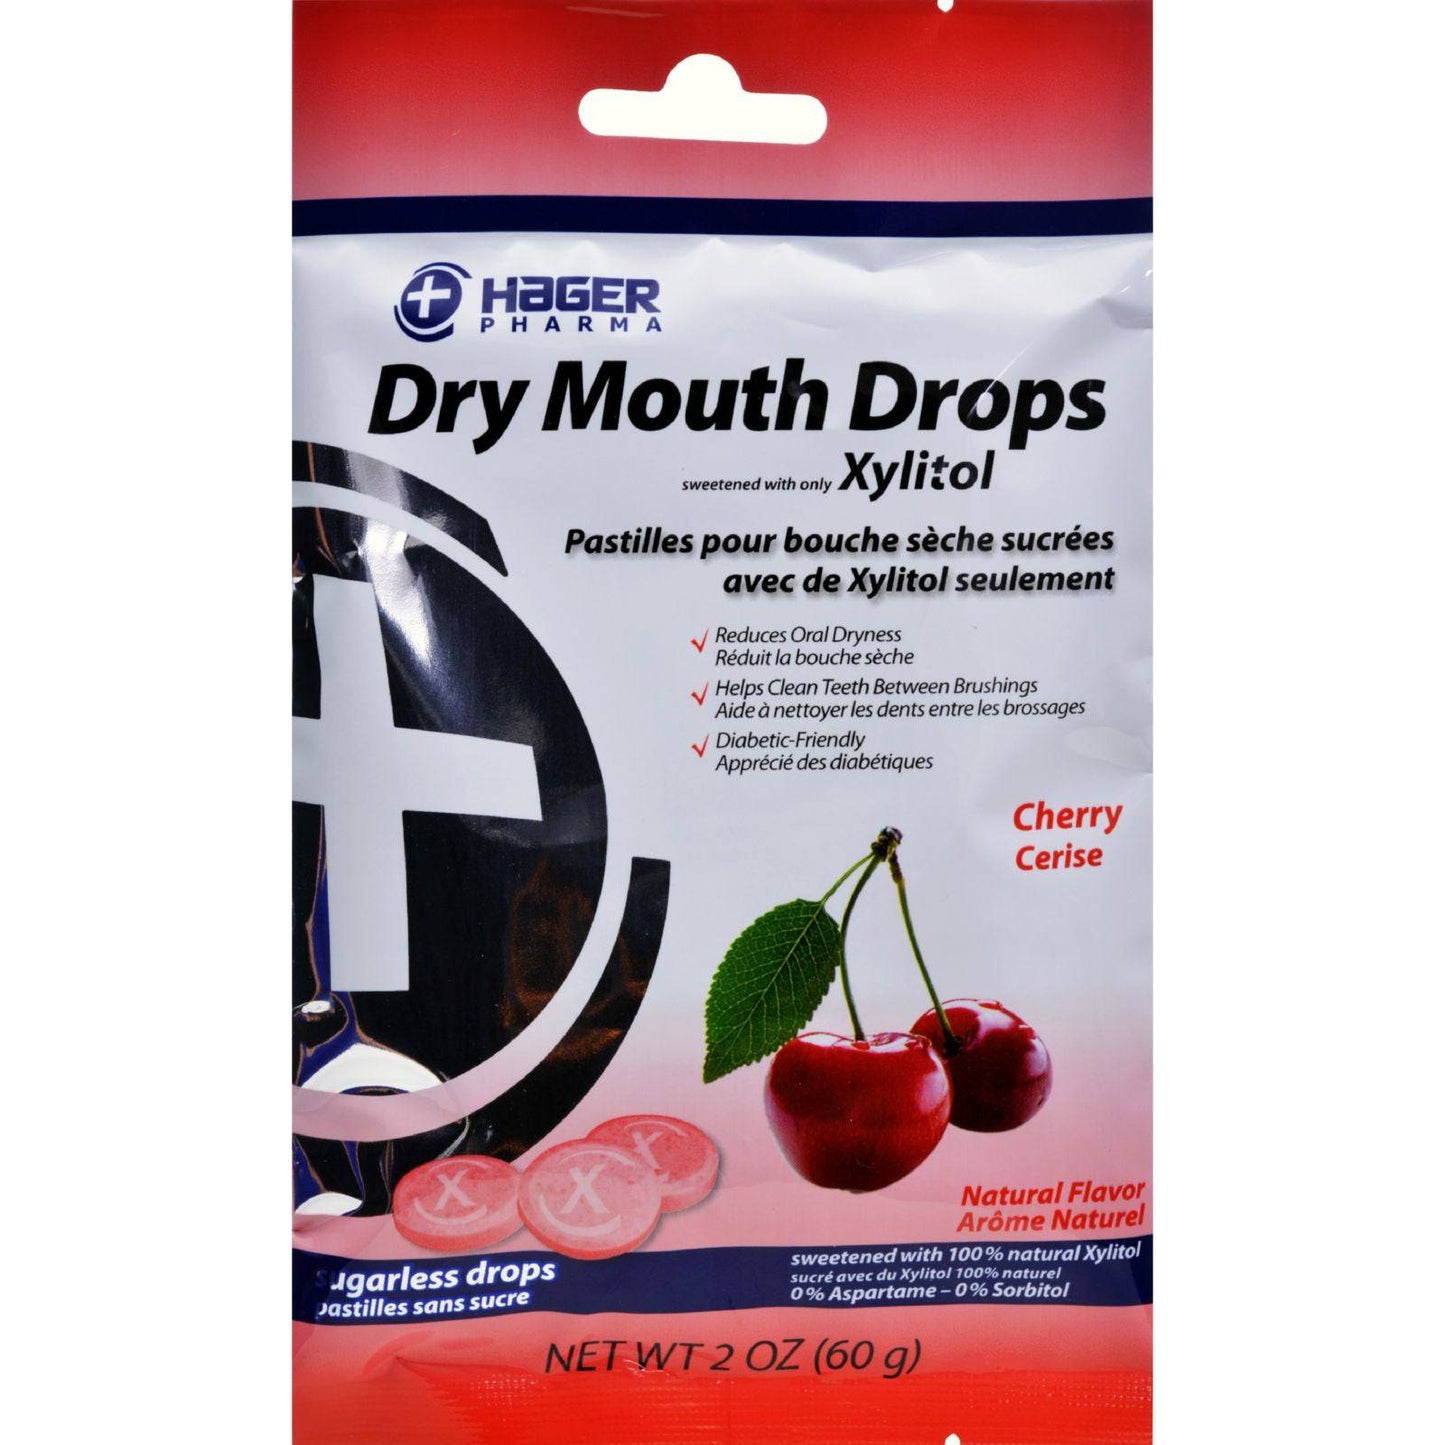 Hager Pharma Dry Mouth Drops - Cherry - 2 Oz | OnlyNaturals.us